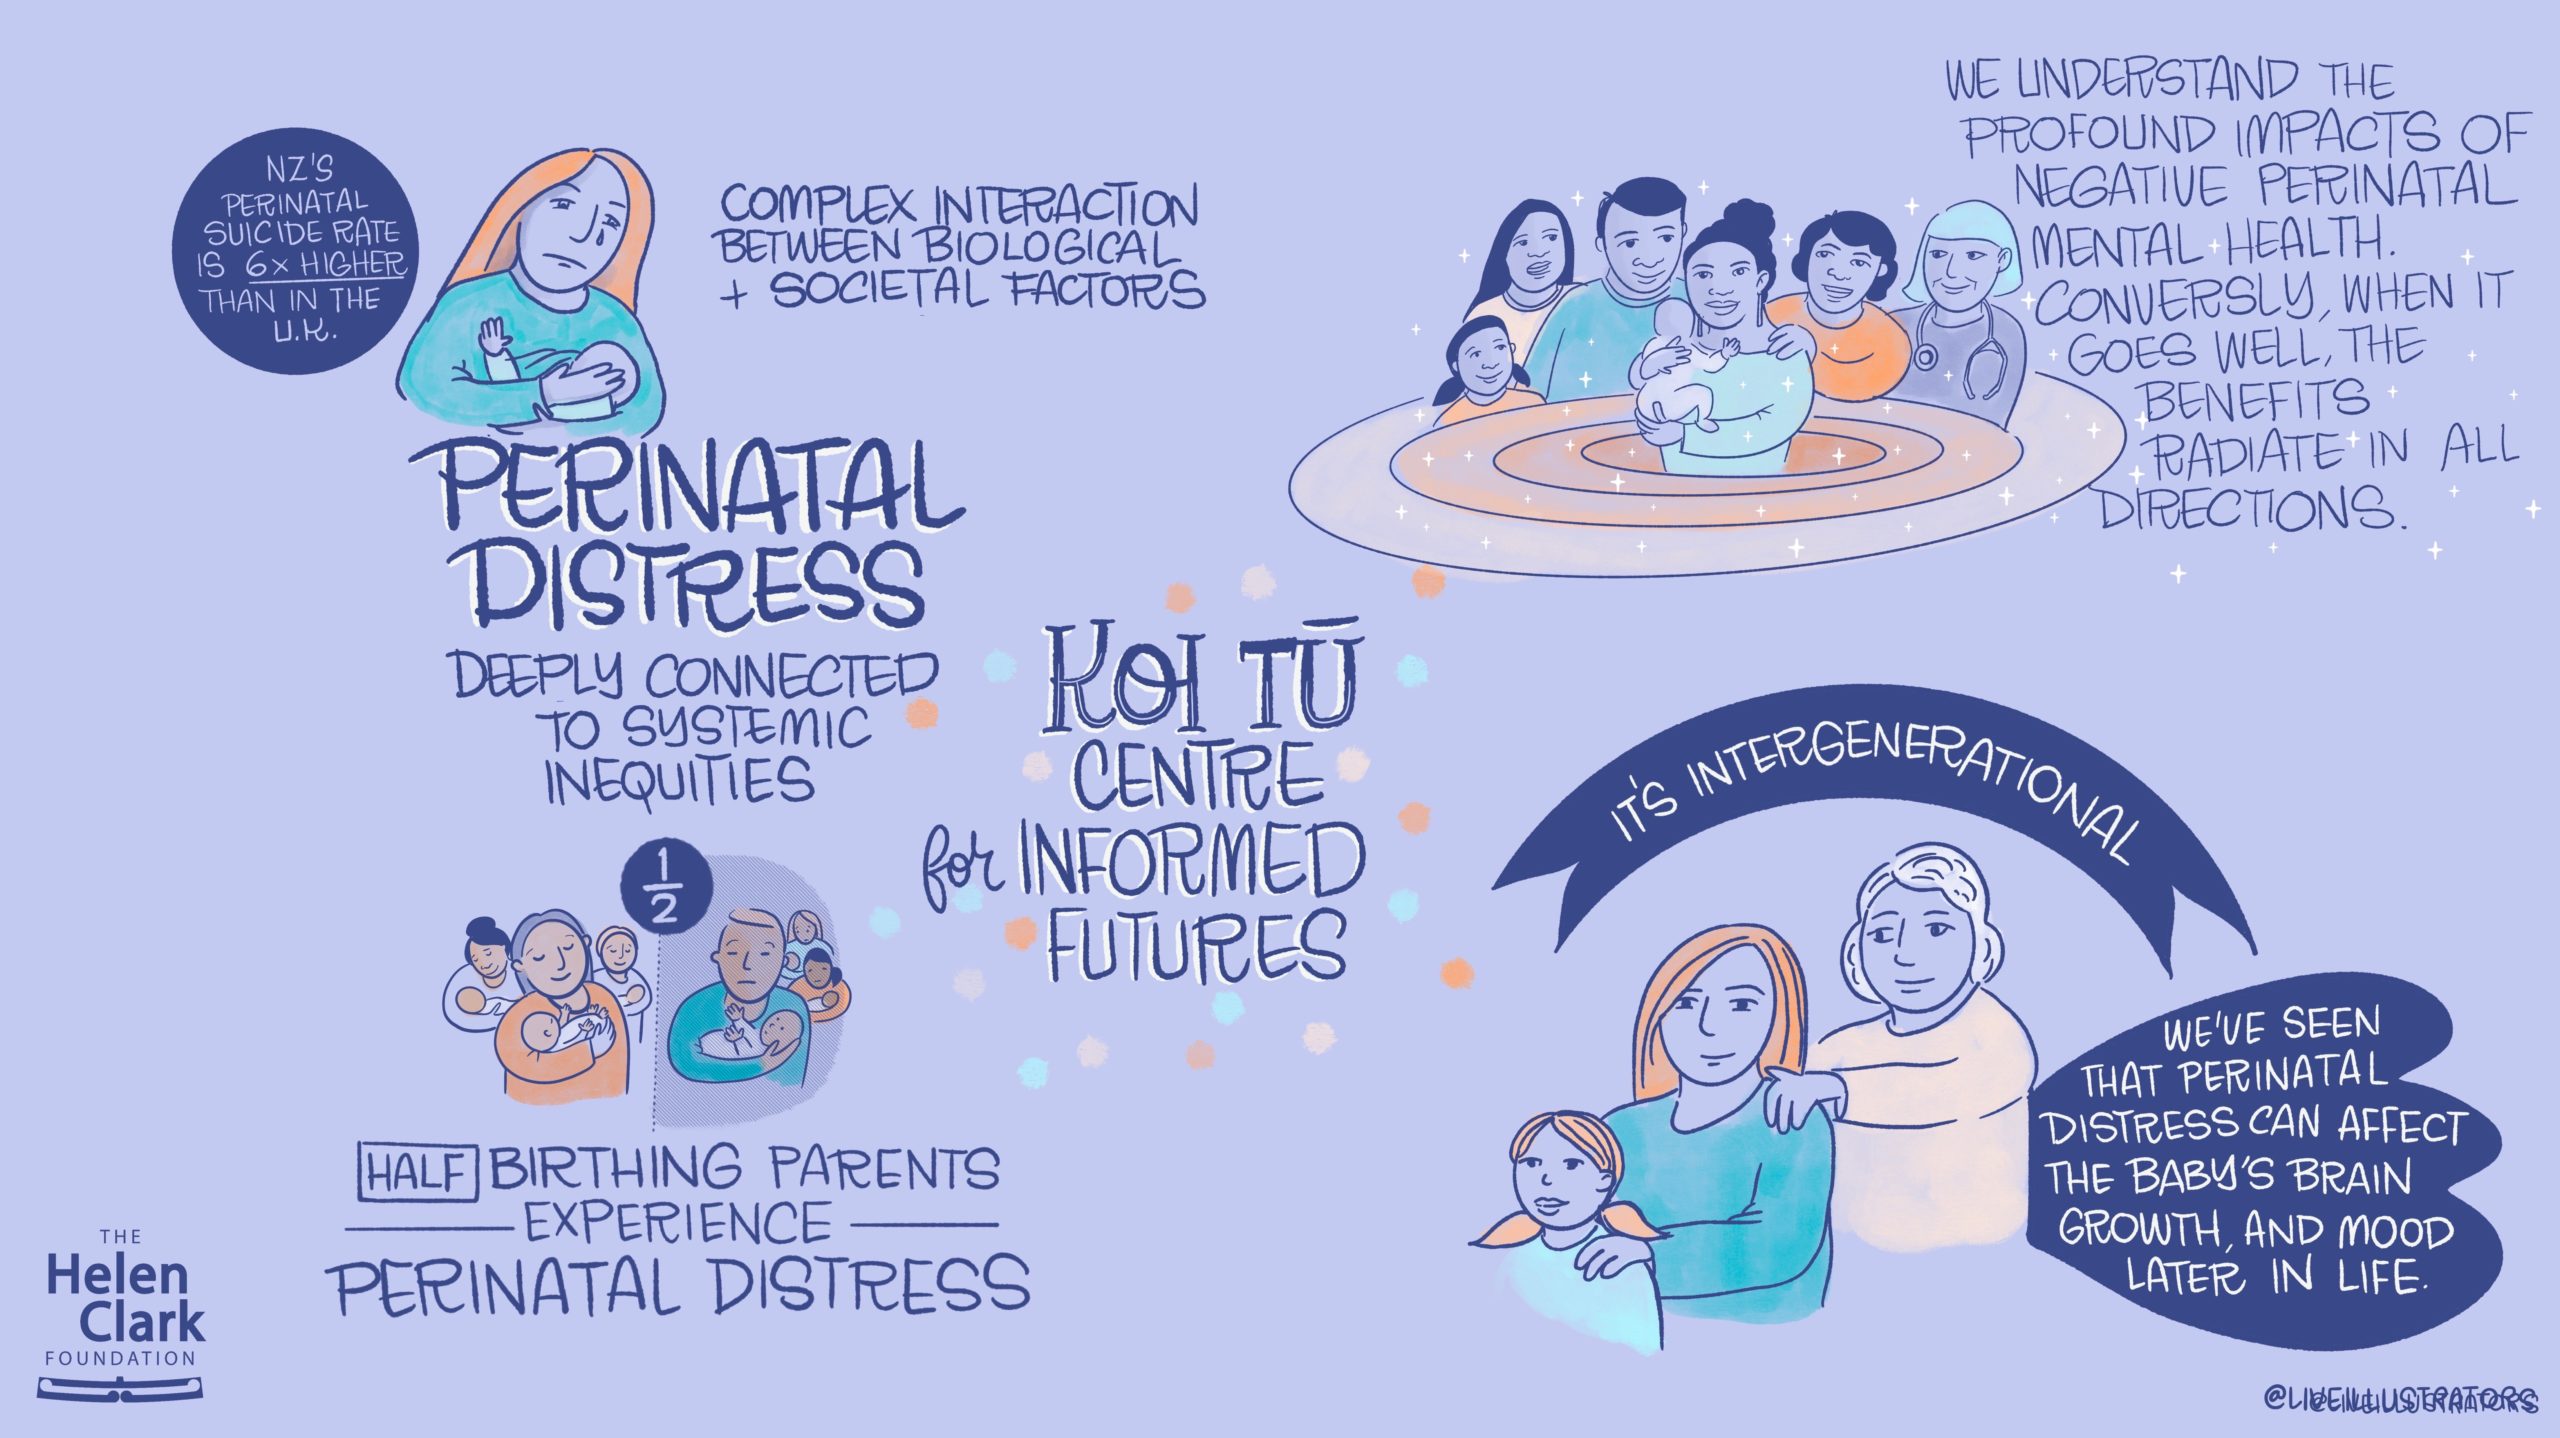 Āhurutia Te Rito It takes a village illustration of outcomes including discussion of perinatal distress and its connection to systemic inequities